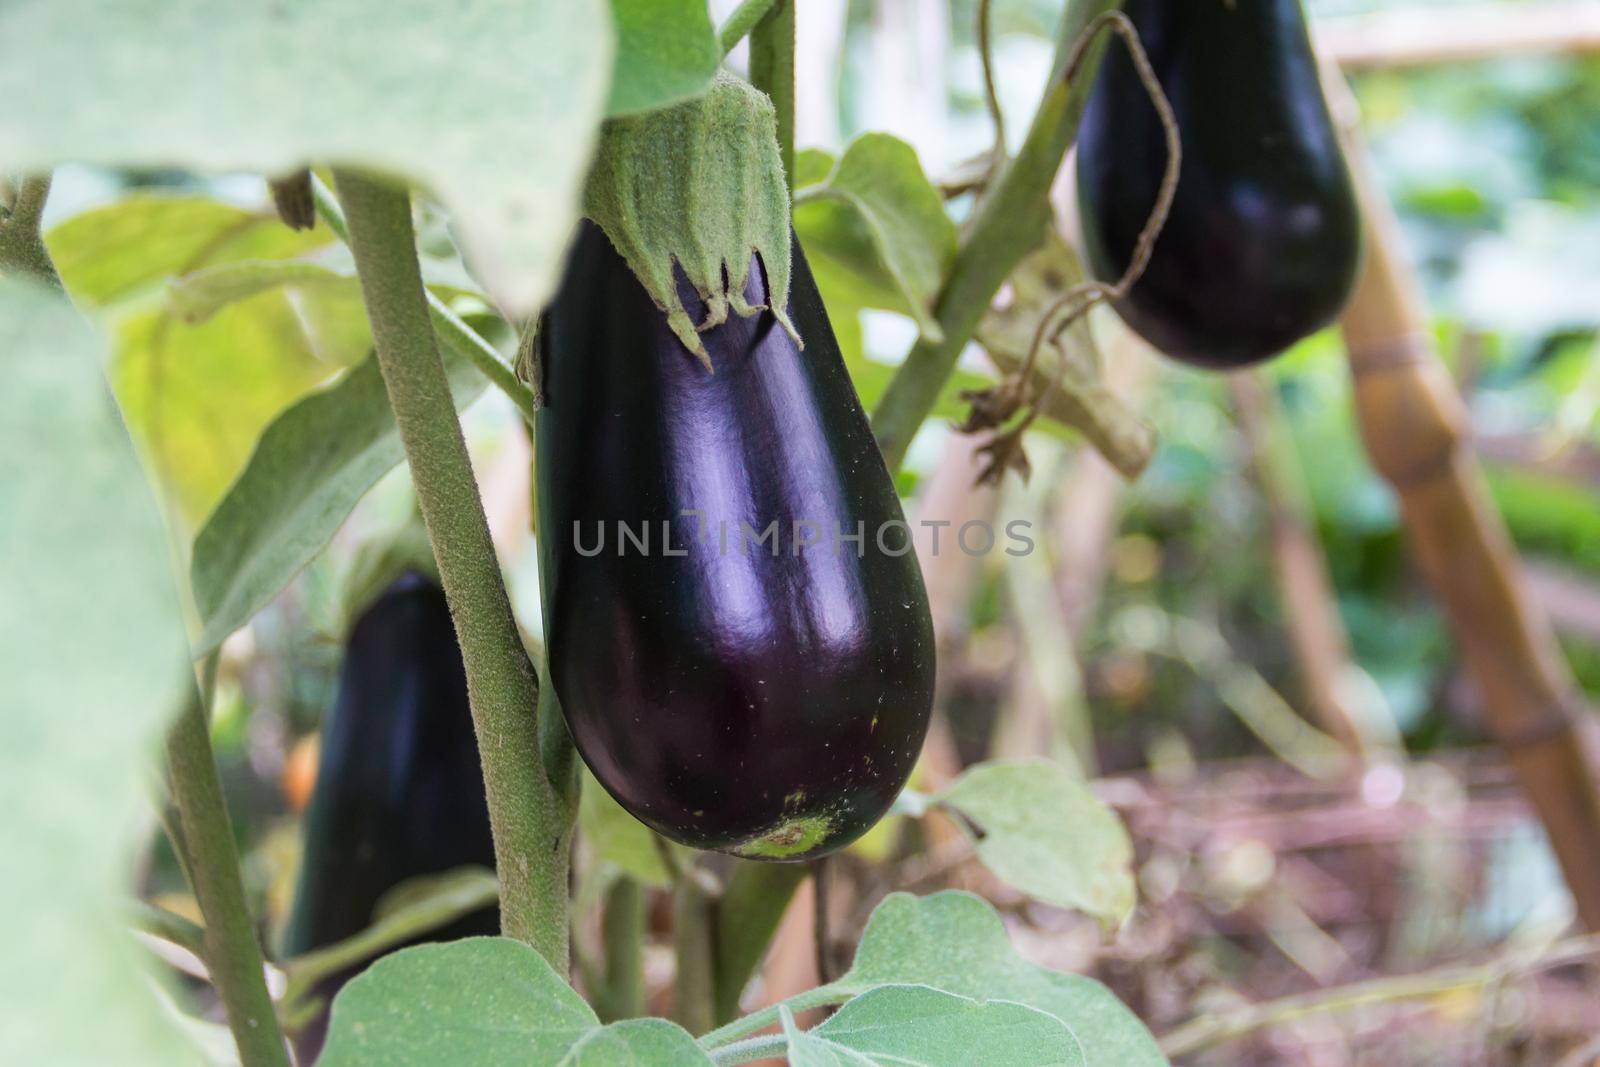 flowers and fruits of violet aubergines in the organic garden plant